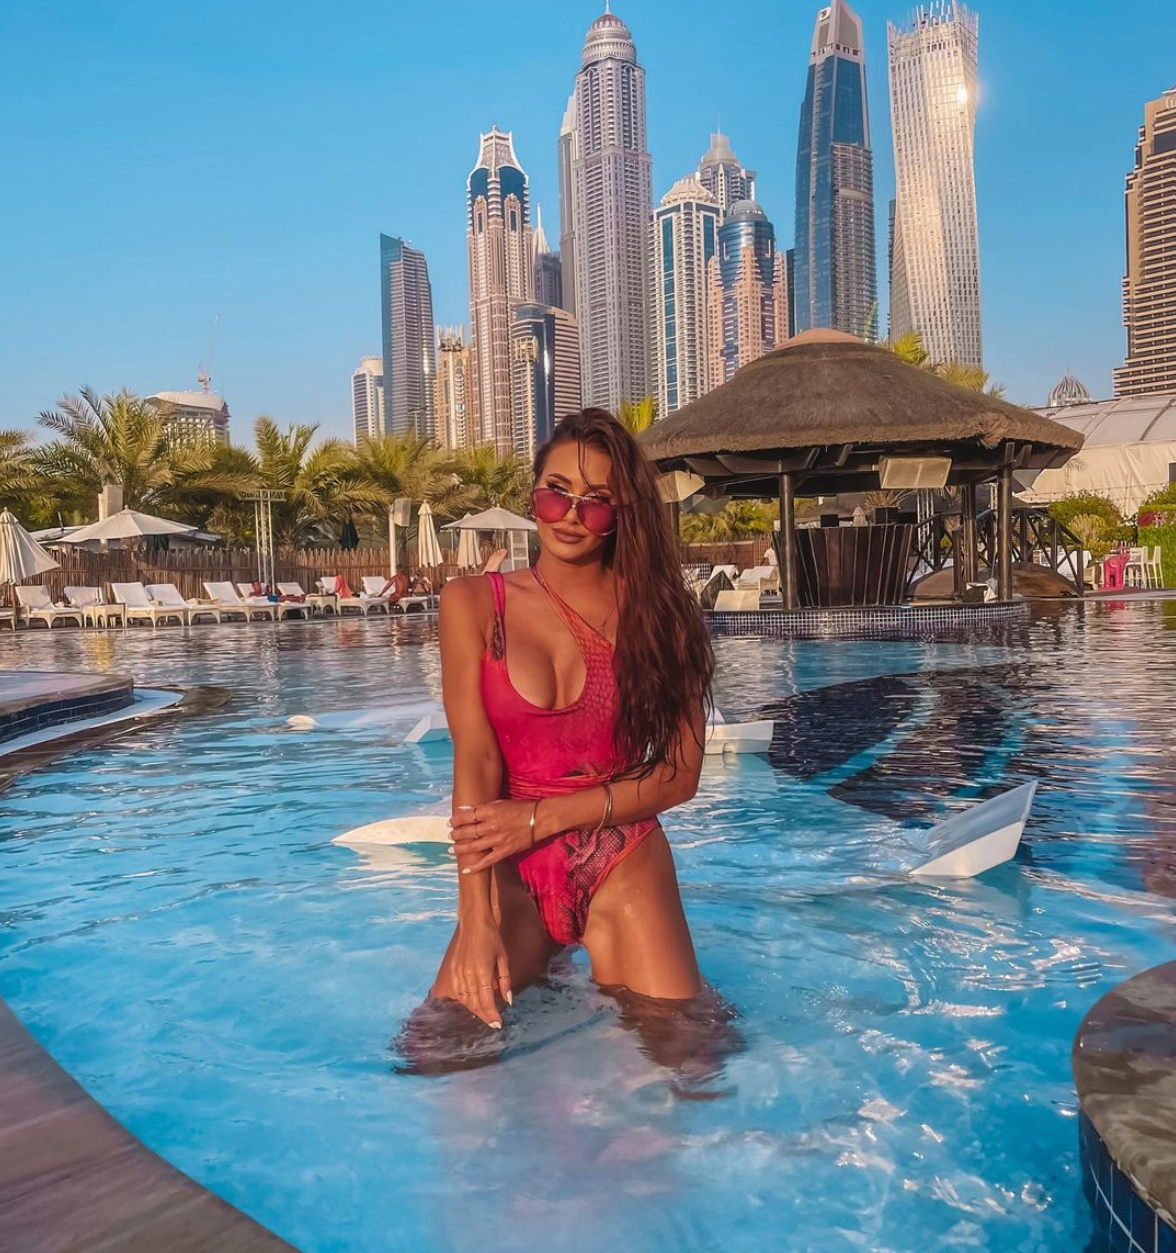 Why Are So Many Influencers in Dubai?